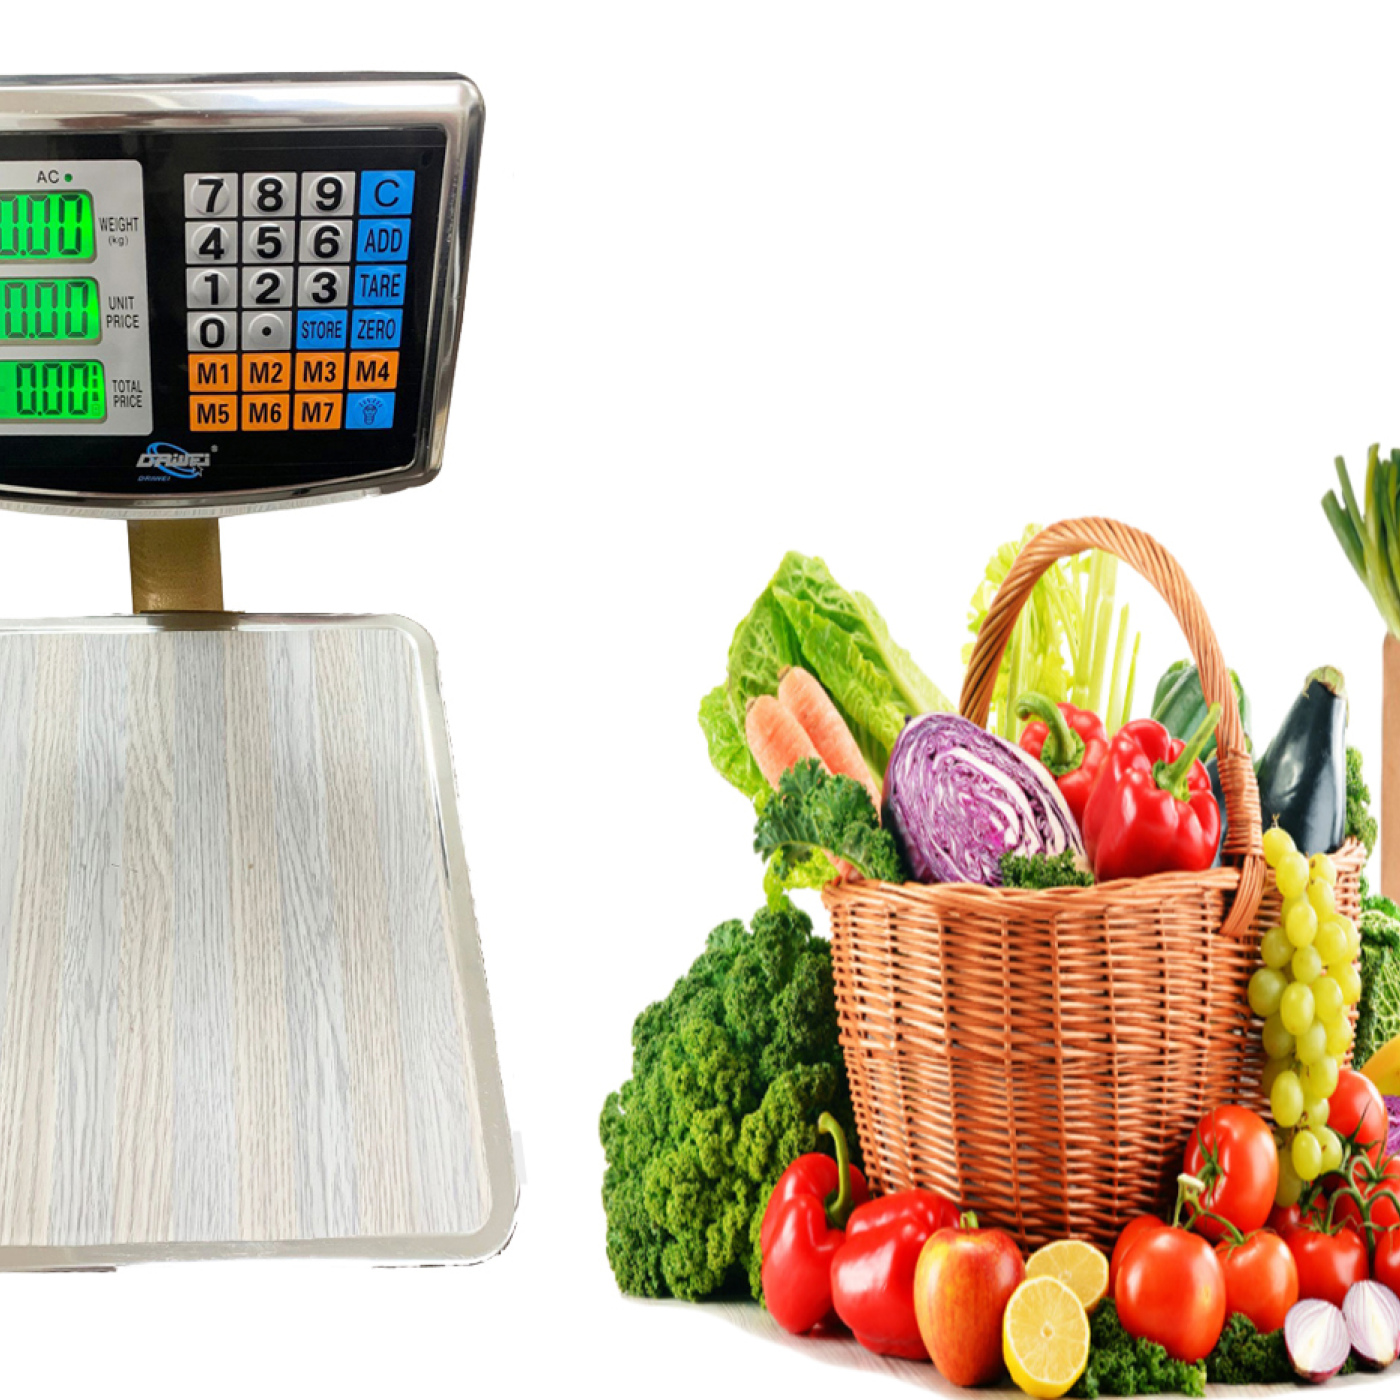 100 Kg Professional digital scale dual display, calculation and price storage *Driwei B35 *